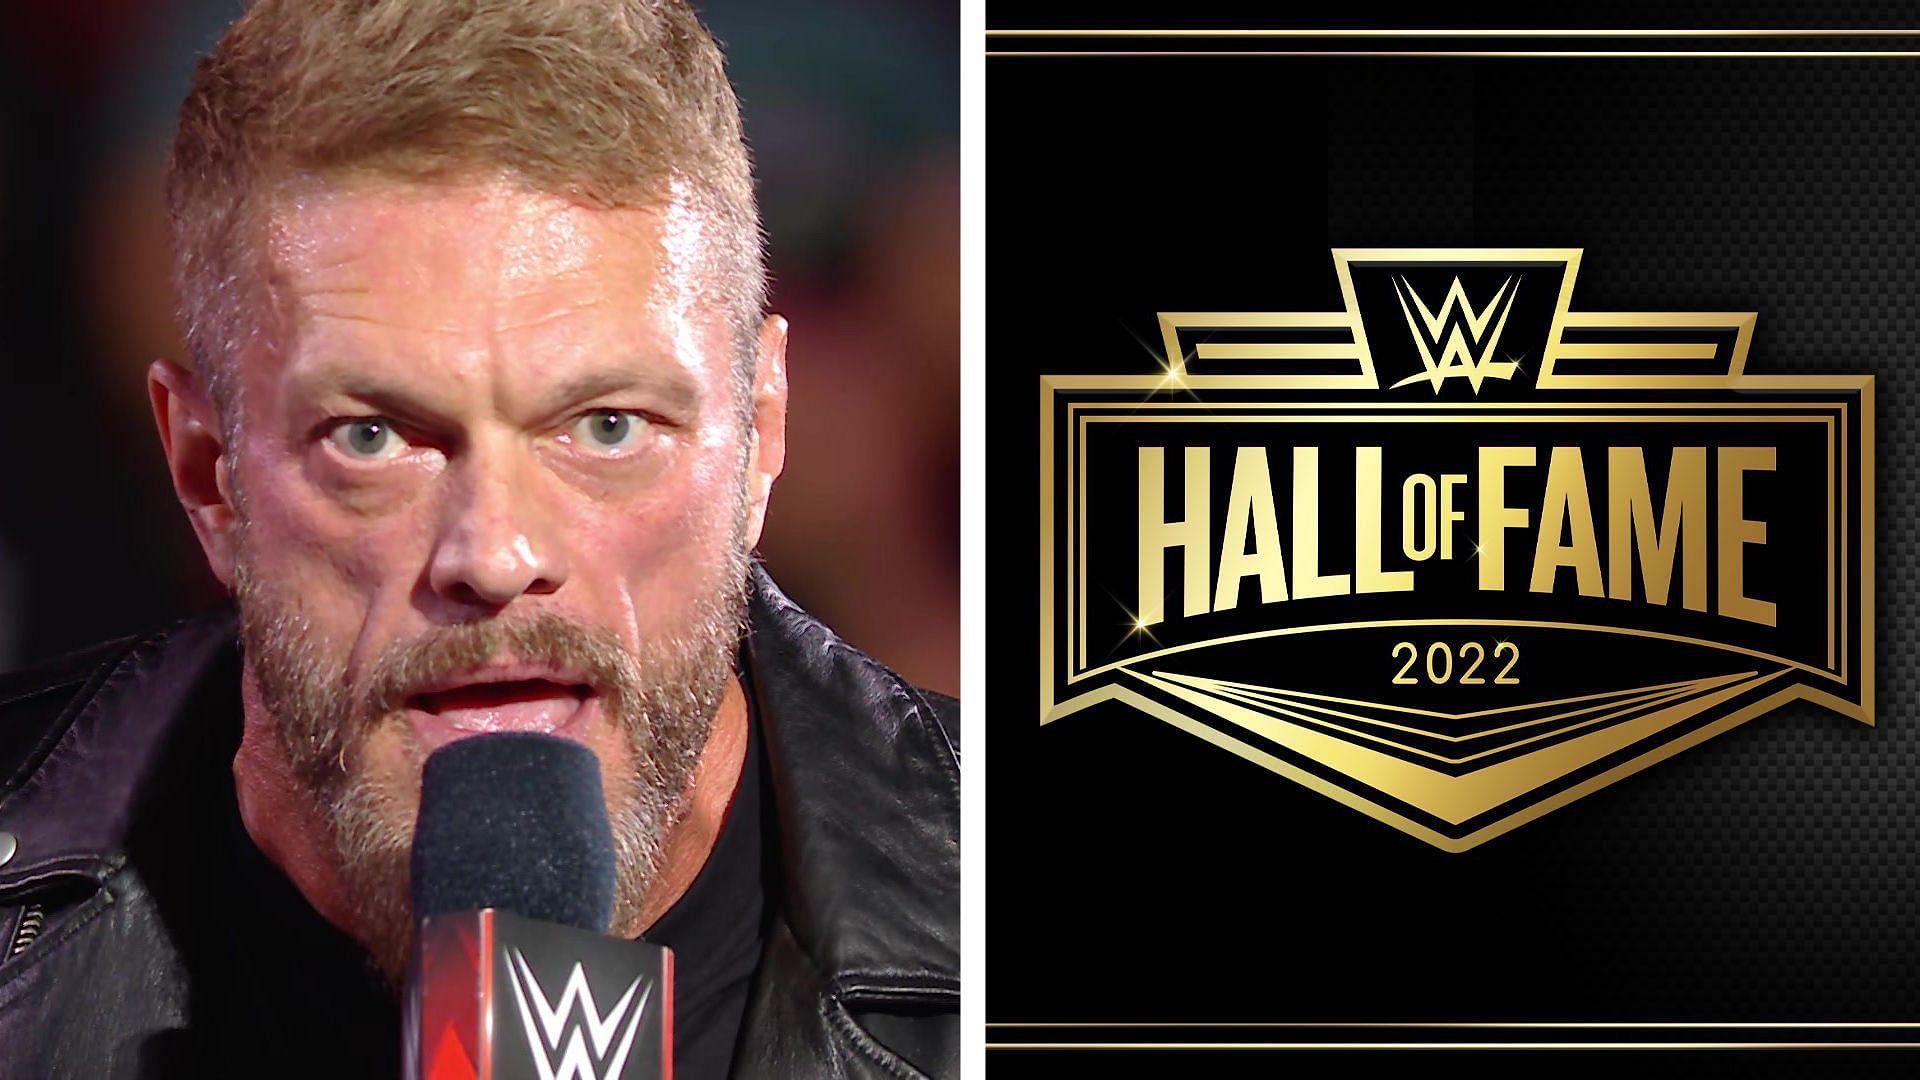 Several WWE Hall of Famers still work for the company